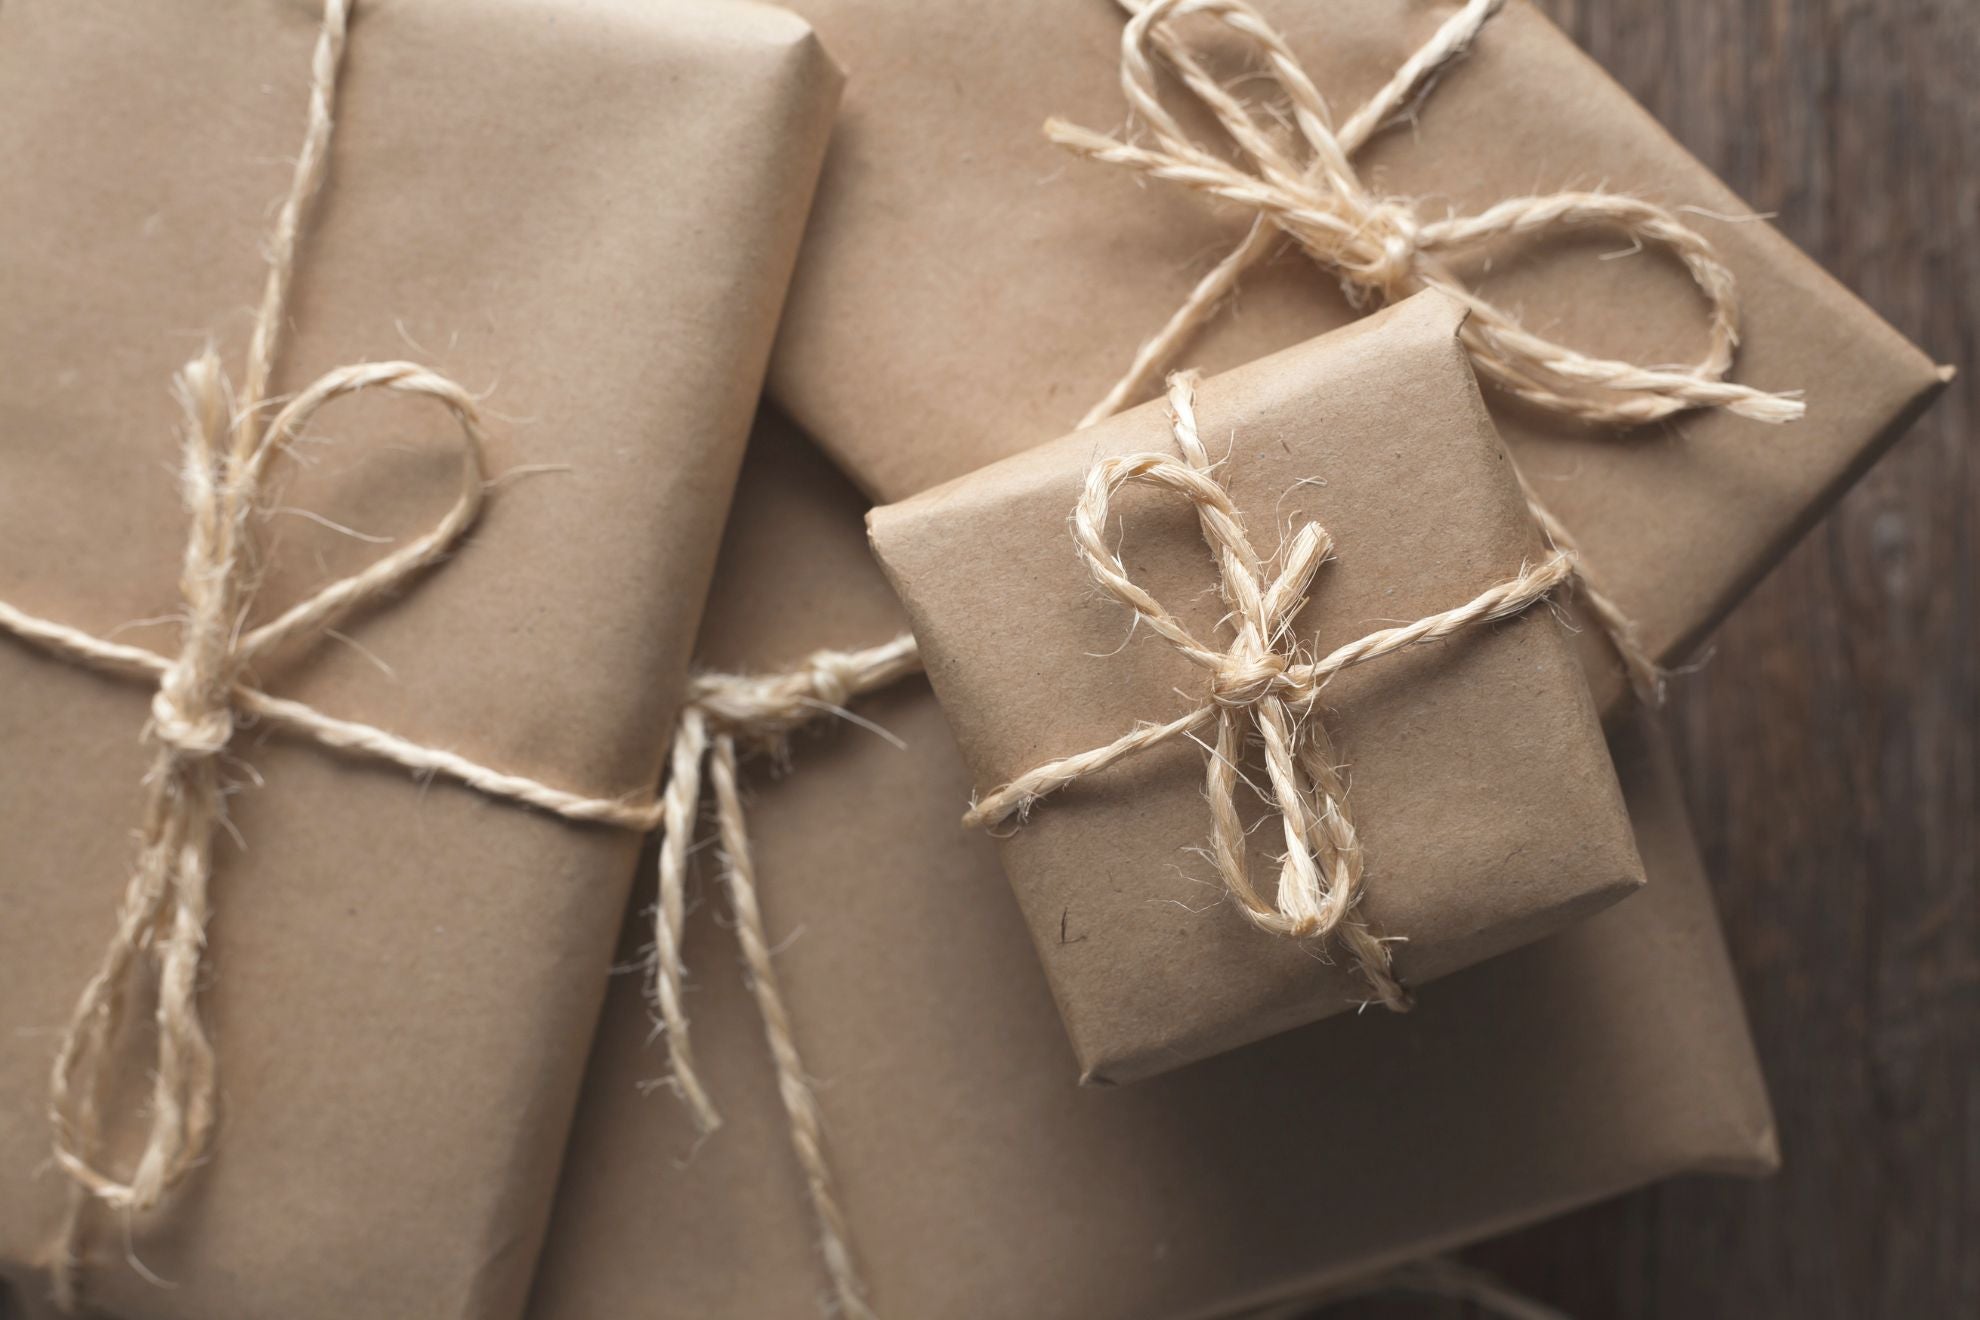 A Procrastinator's Guide to Last Minute Gift Giving